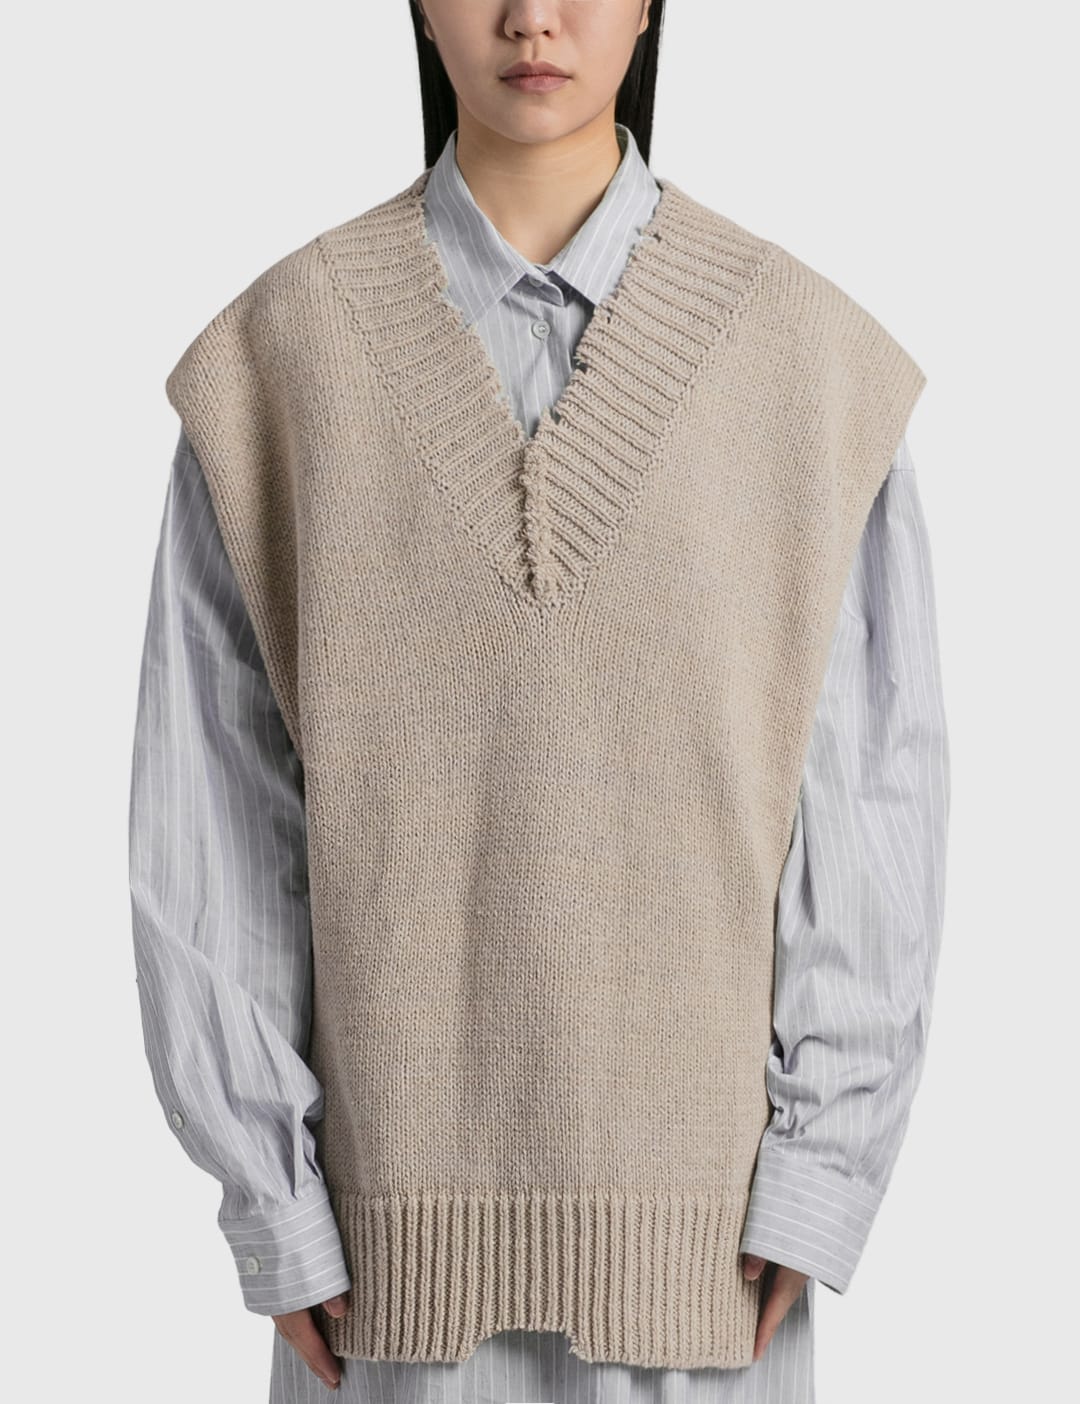 Maison Margiela - Destroyed Knit Vest | HBX - Globally Curated